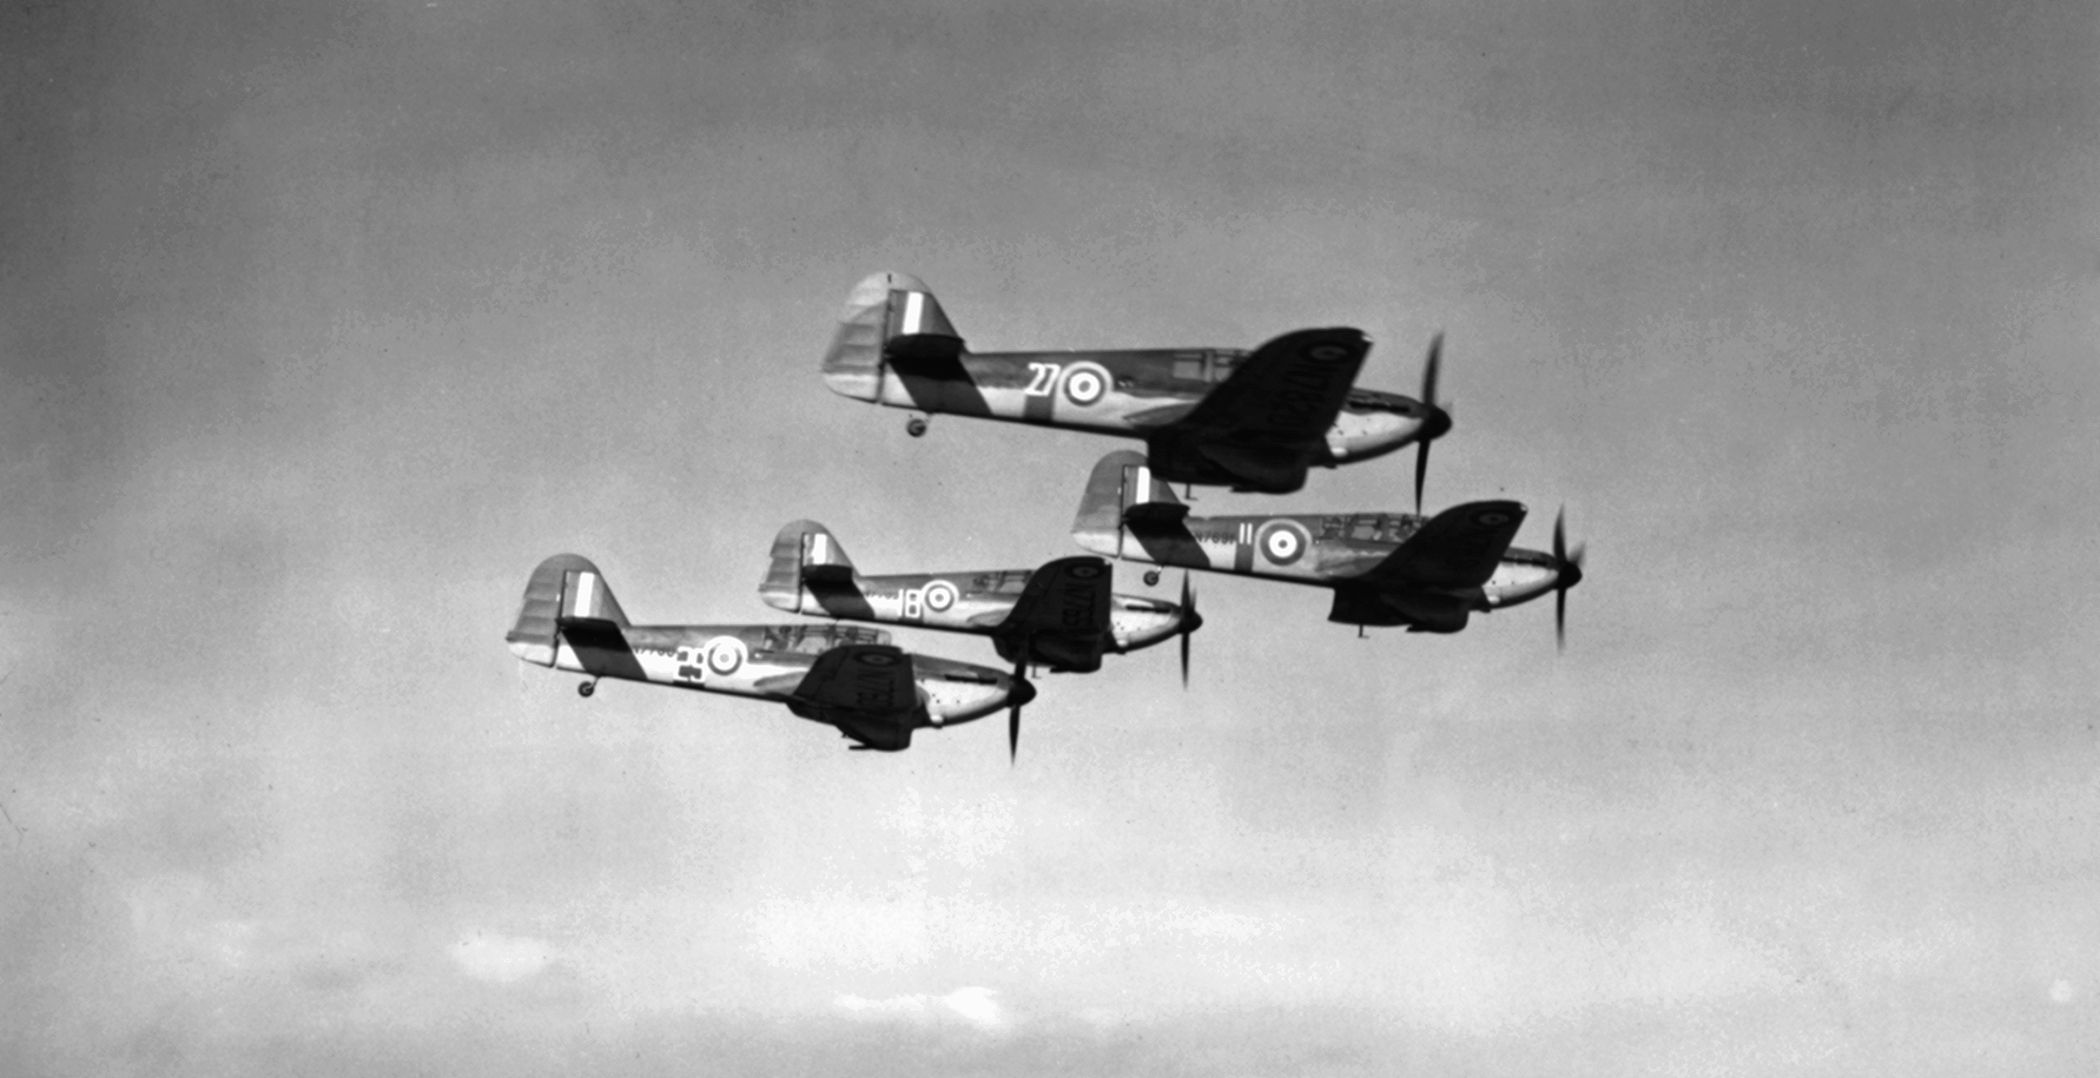 A flight of “American Eagle” pilots gets familiar with Hawker Hurricanes during aerial training at an RAF base.